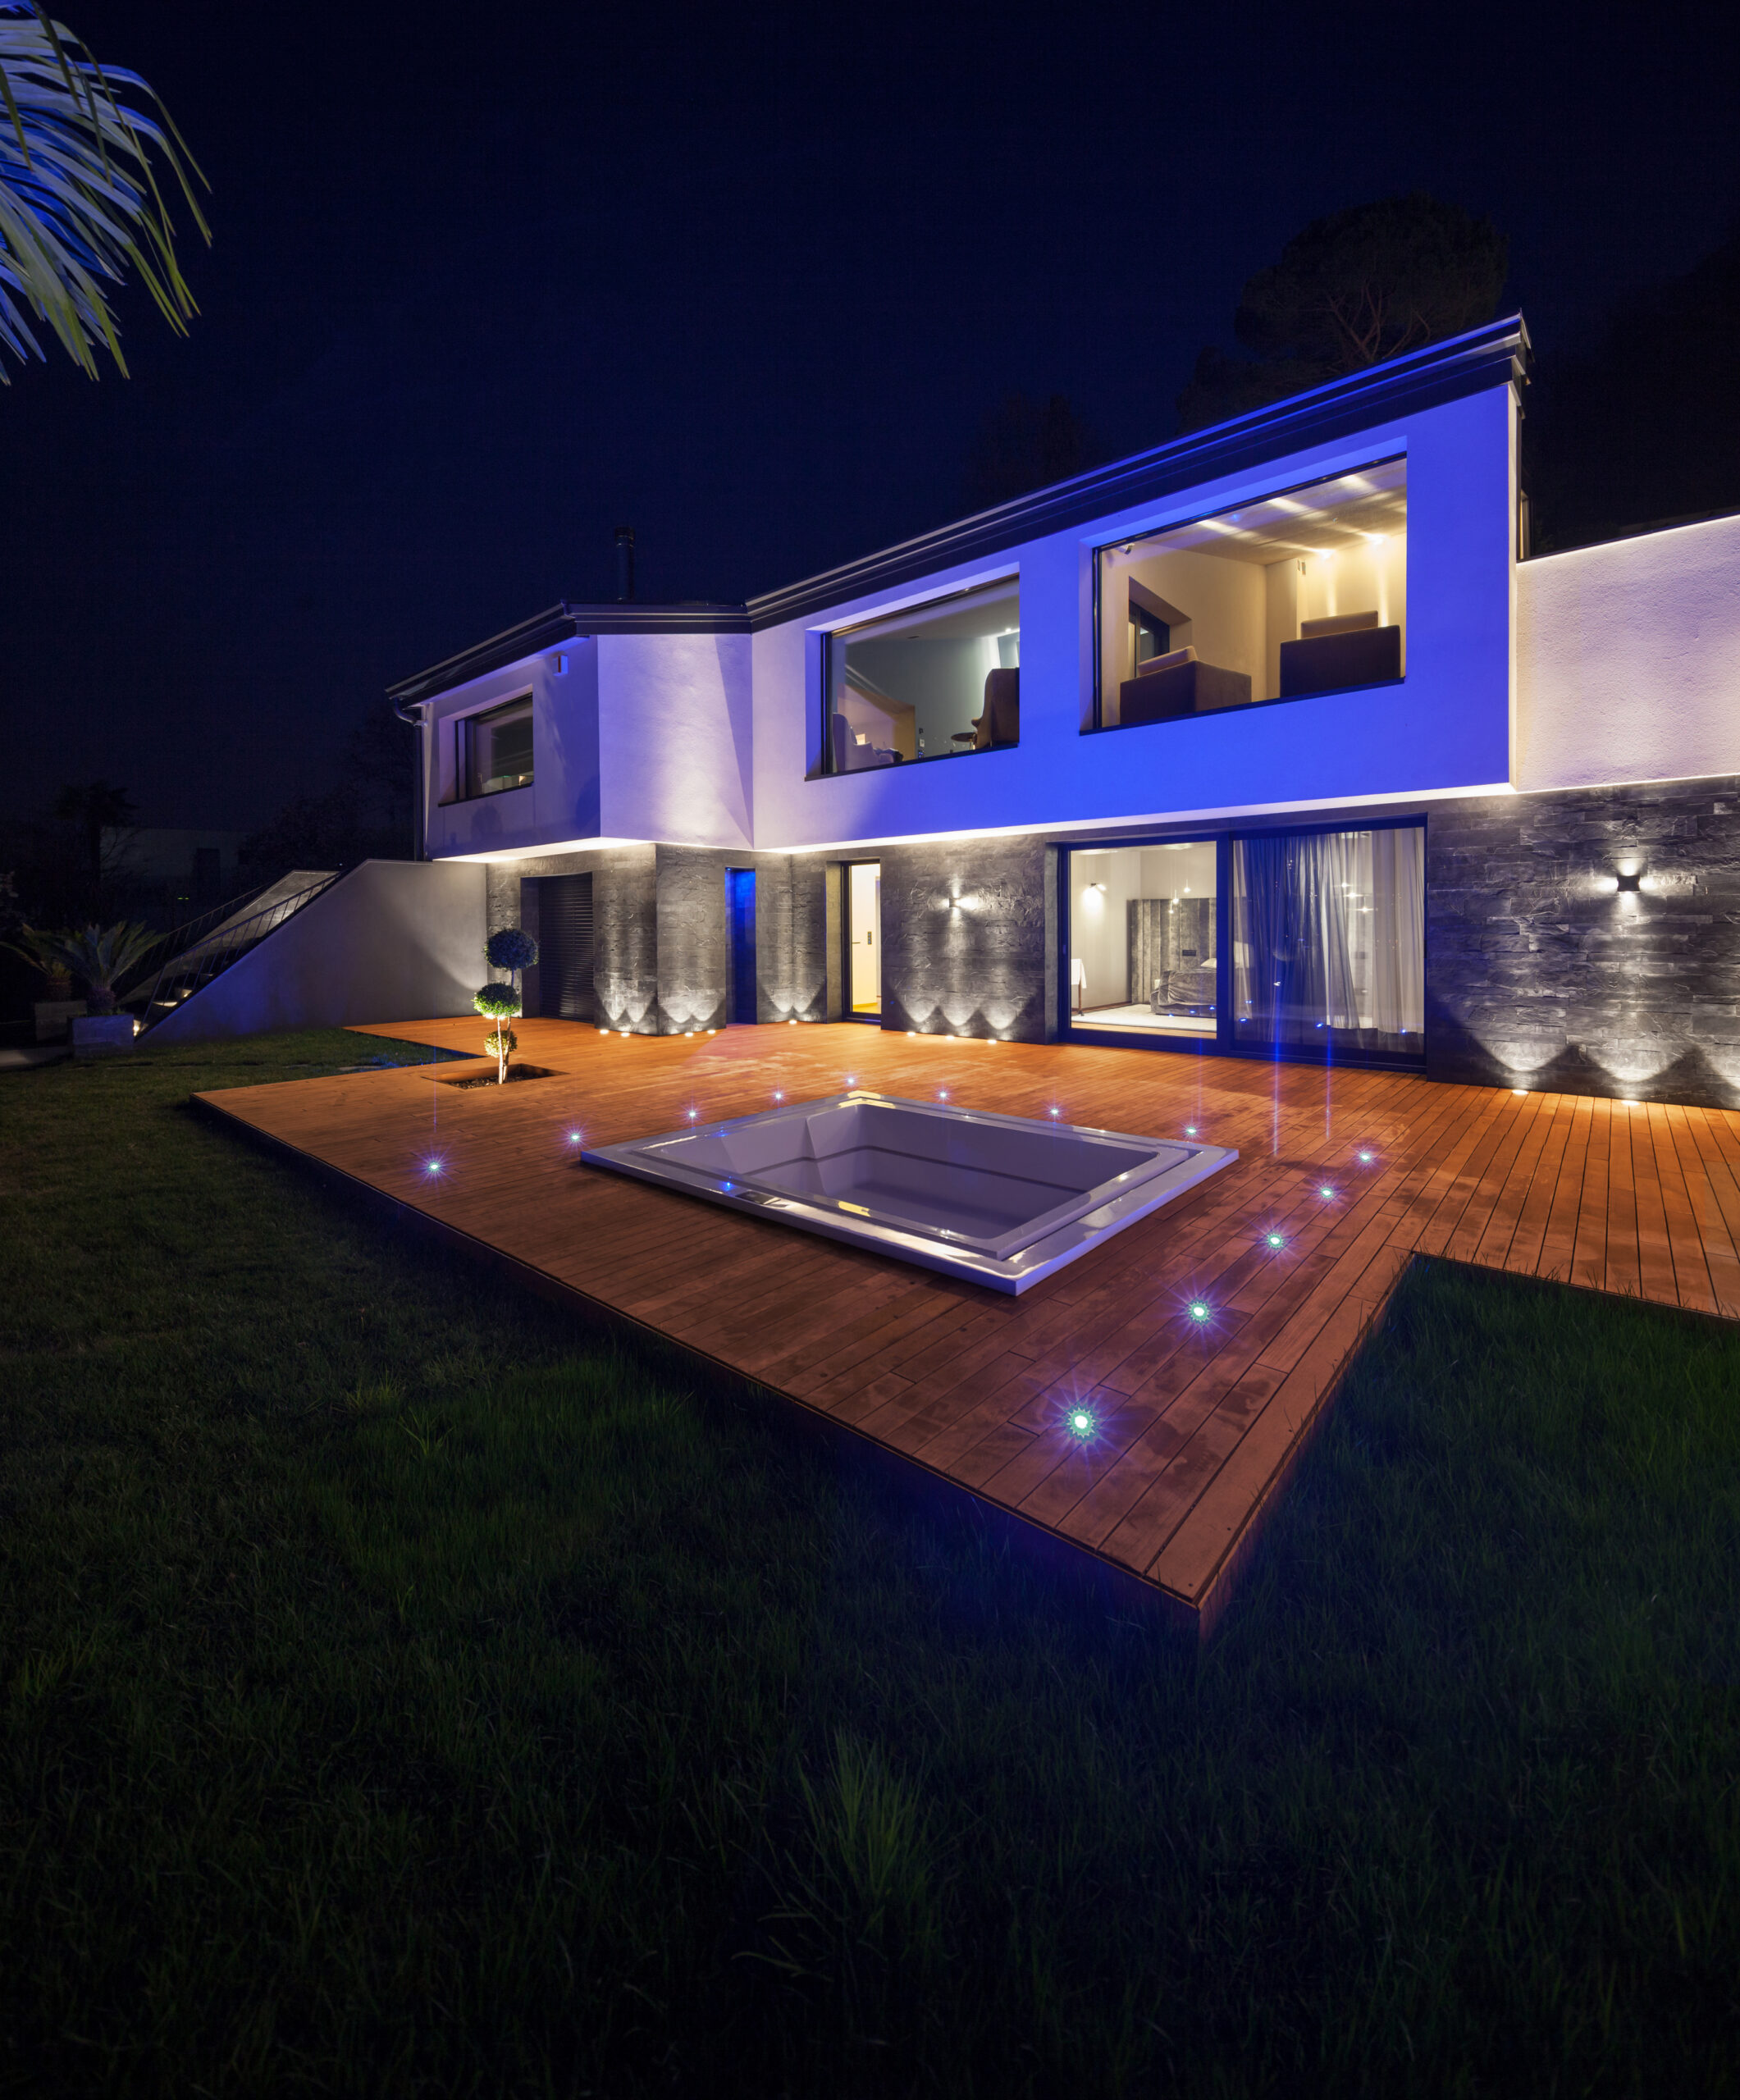 View of modern villa with pool in the night using permament lights